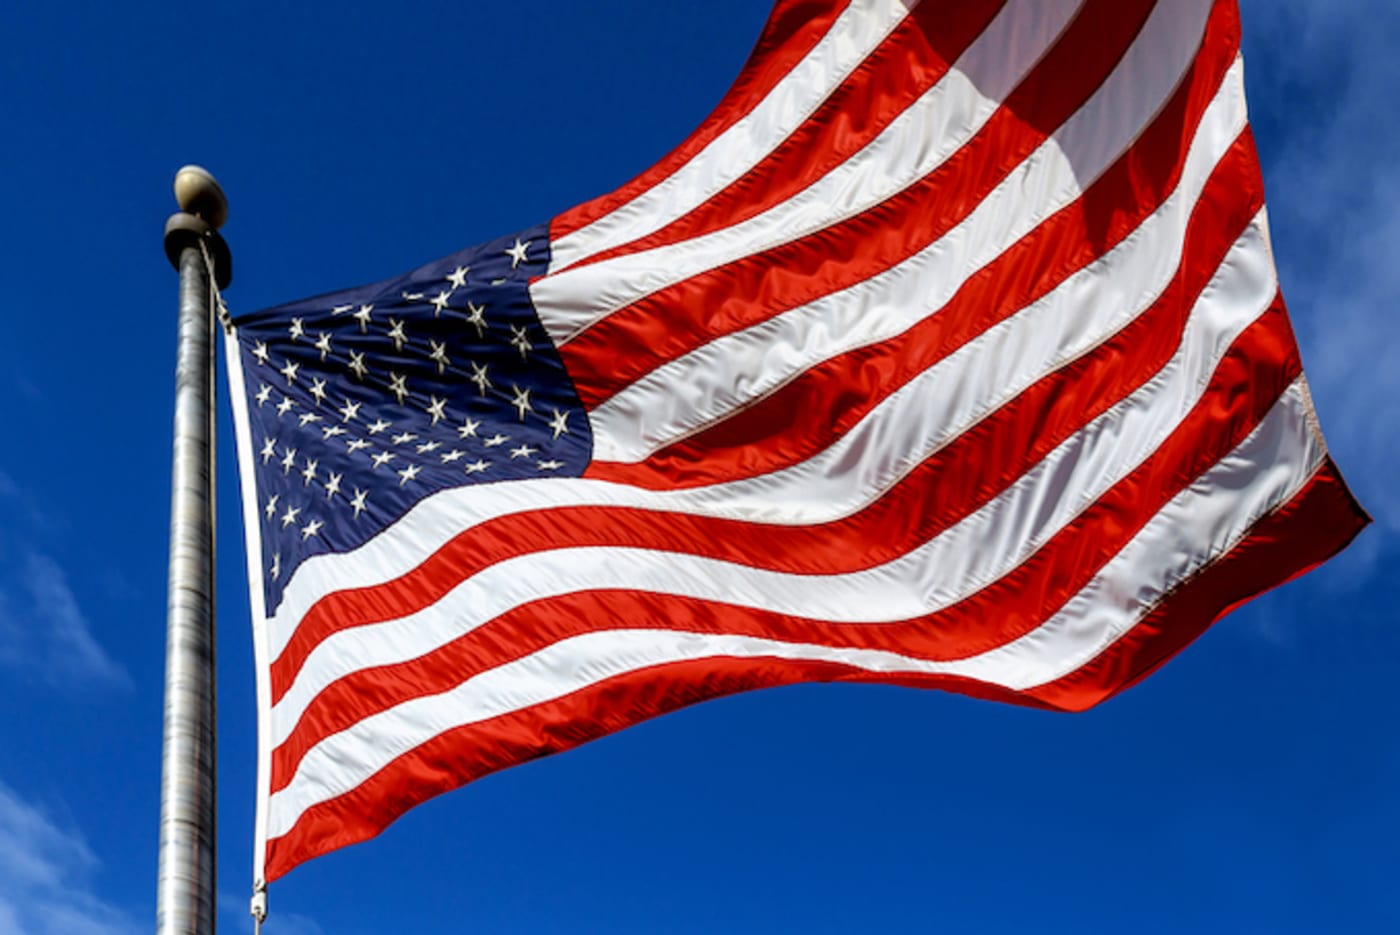 This is a picture of the American flag.